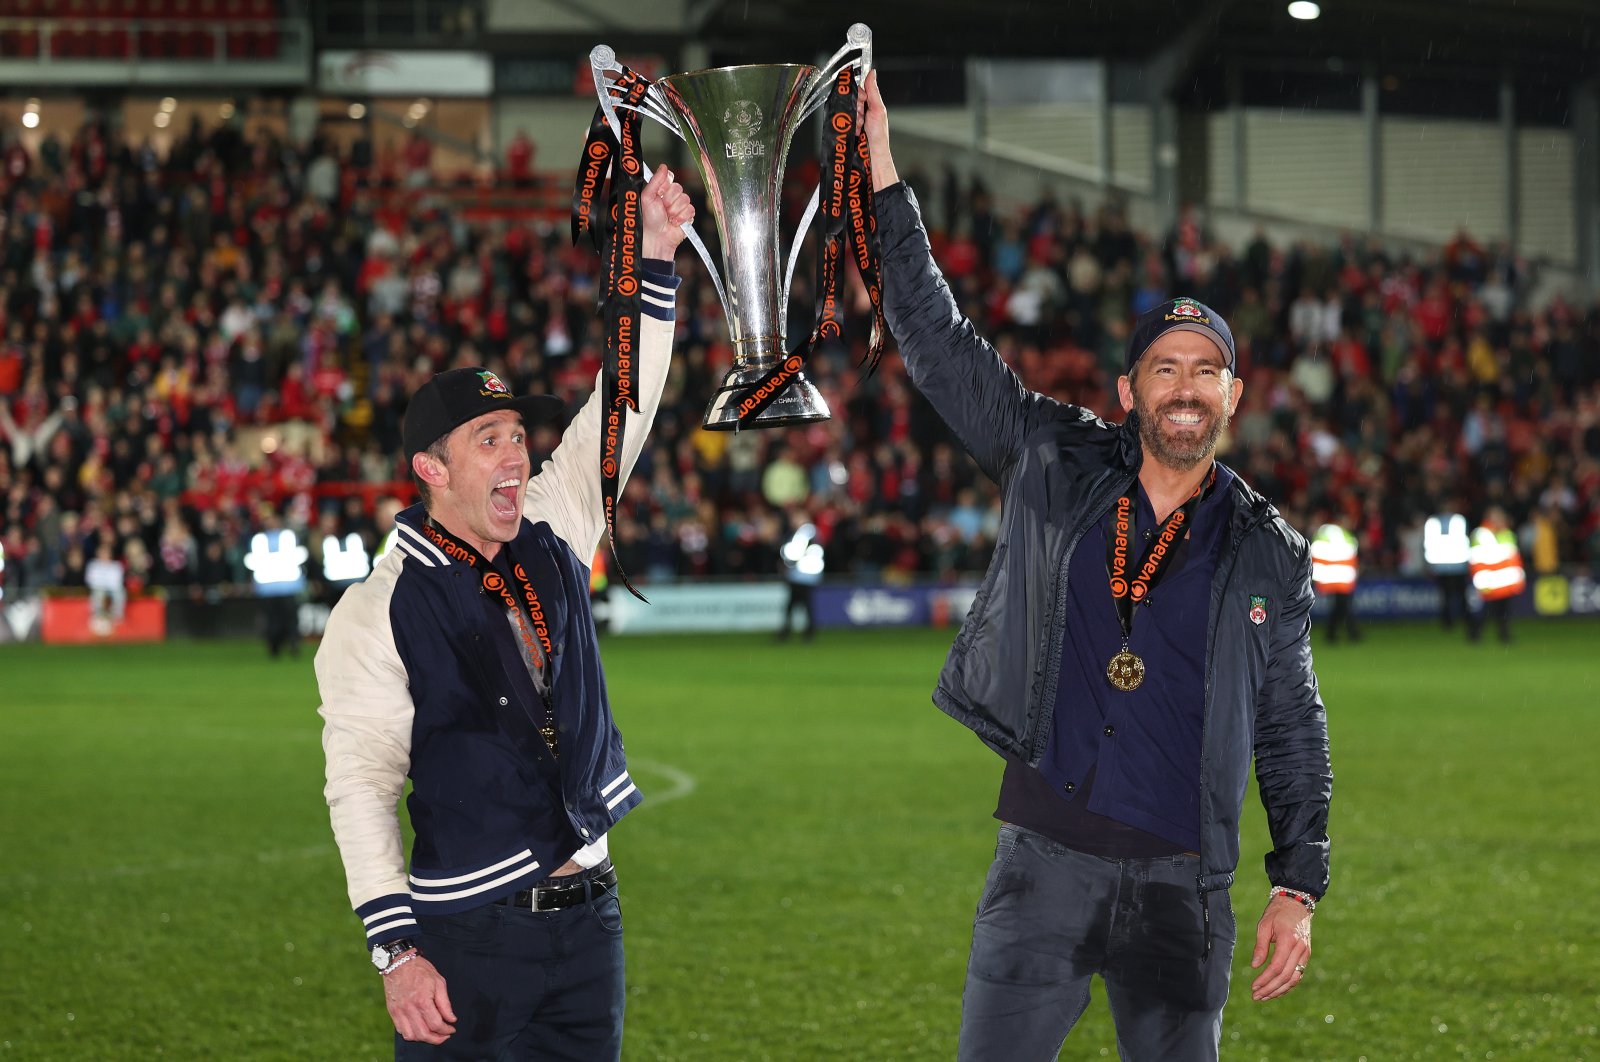 Wrexham owners Rob McElhenney and Ryan Reynolds (R) hold the Vanarama National League Trophy as Wrexham celebrate promotion back to the English Football League during the Vanarama National League match between Wrexham and Boreham Wood at Racecourse Ground, Wrexham, Wales, U.K., April 22, 2023. (Getty Images Photo)